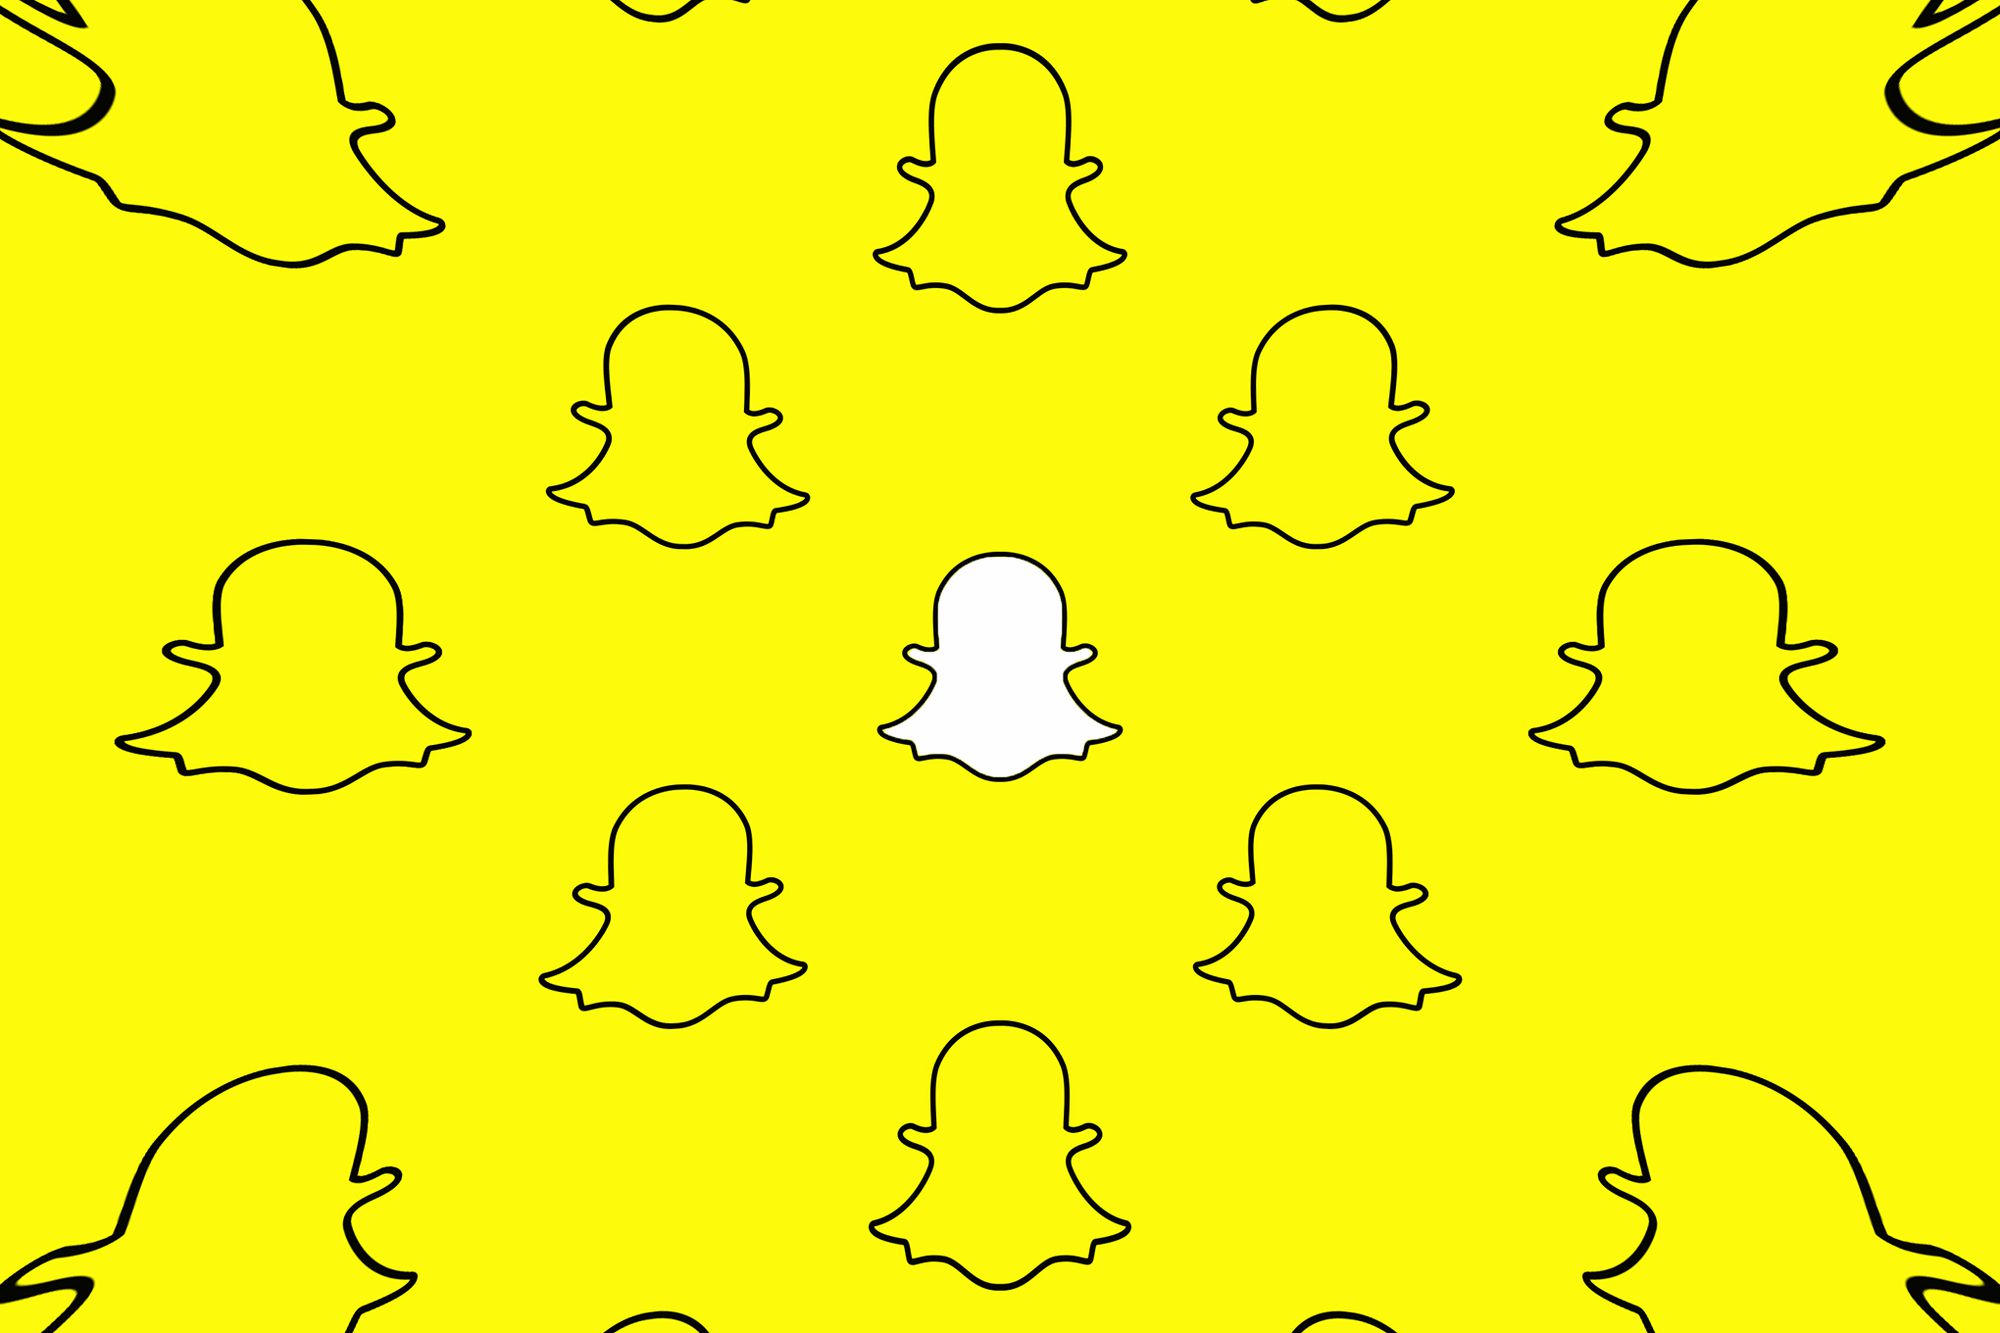 Here’s the meaning of Time Sensitive on Snapchat